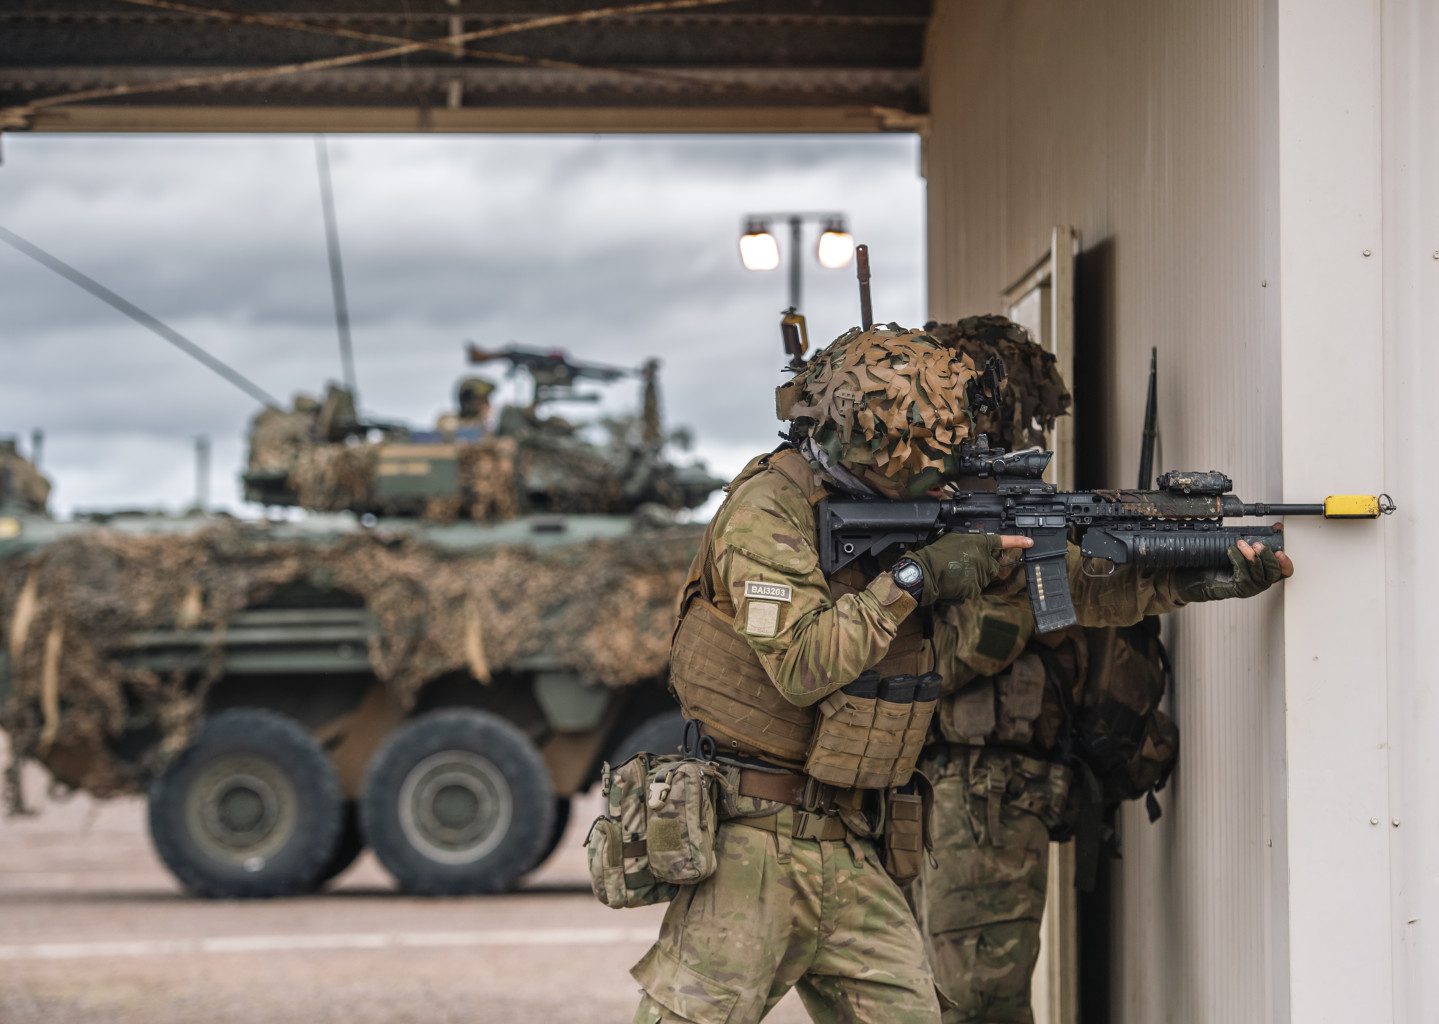 New Zealand is participating in the multinational exercise Talisman Saber 2023 in Australia, using the VCBR LAV and NH90 helicopters.